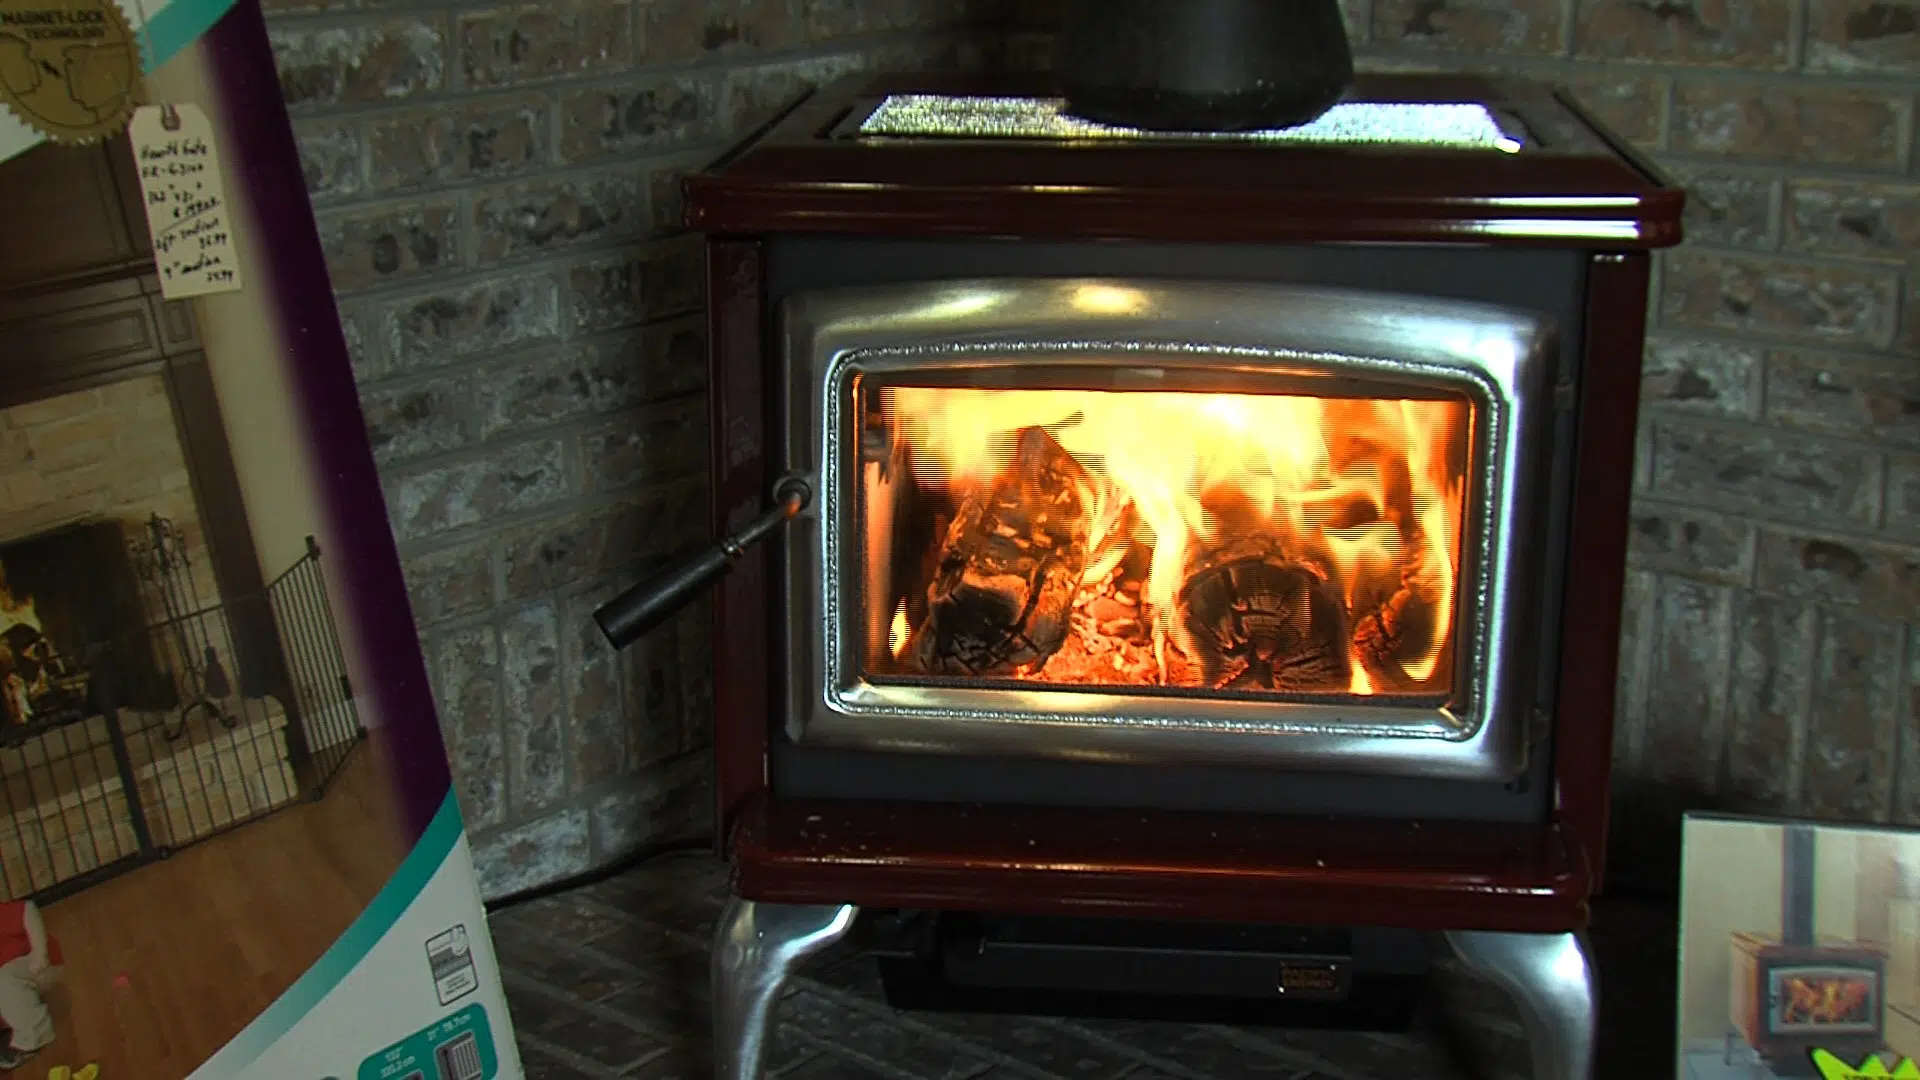 wood-stove-rebate-program-intended-to-improve-air-quality-ckpgtoday-ca